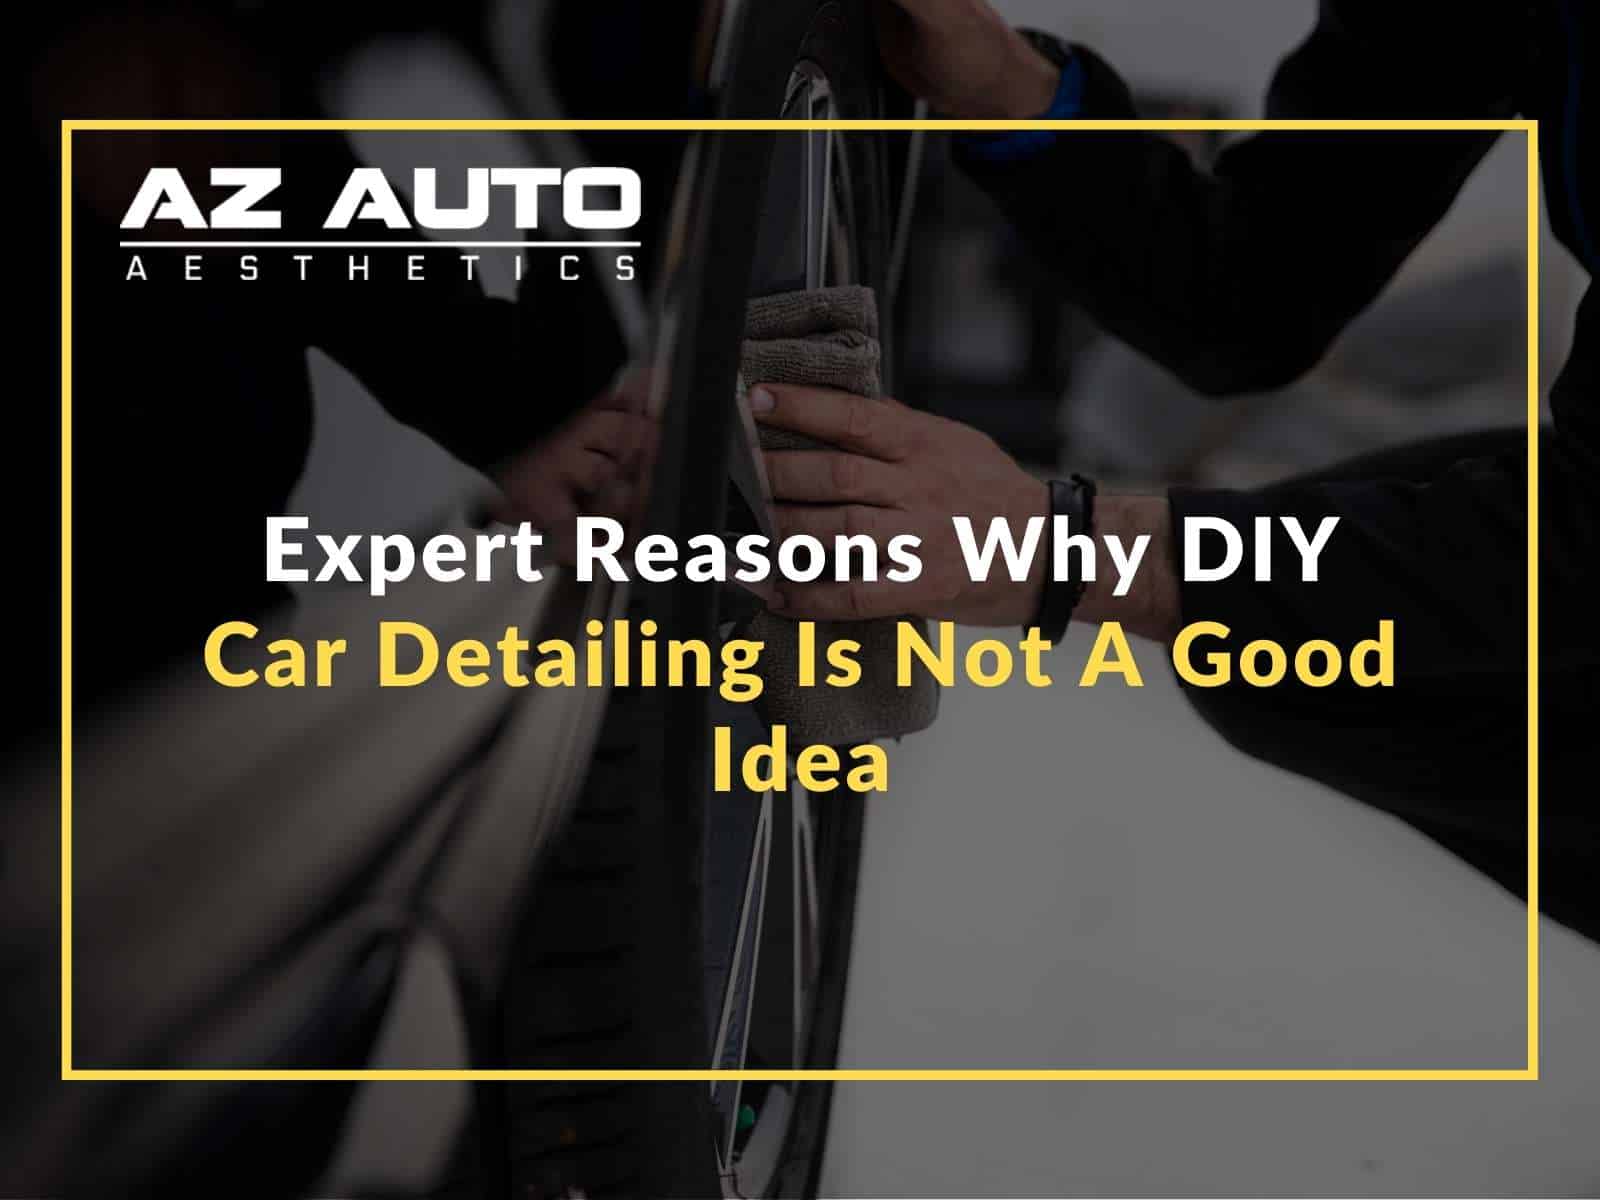 Expert Reasons Why DIY Car Detailing Is Not a Good Idea